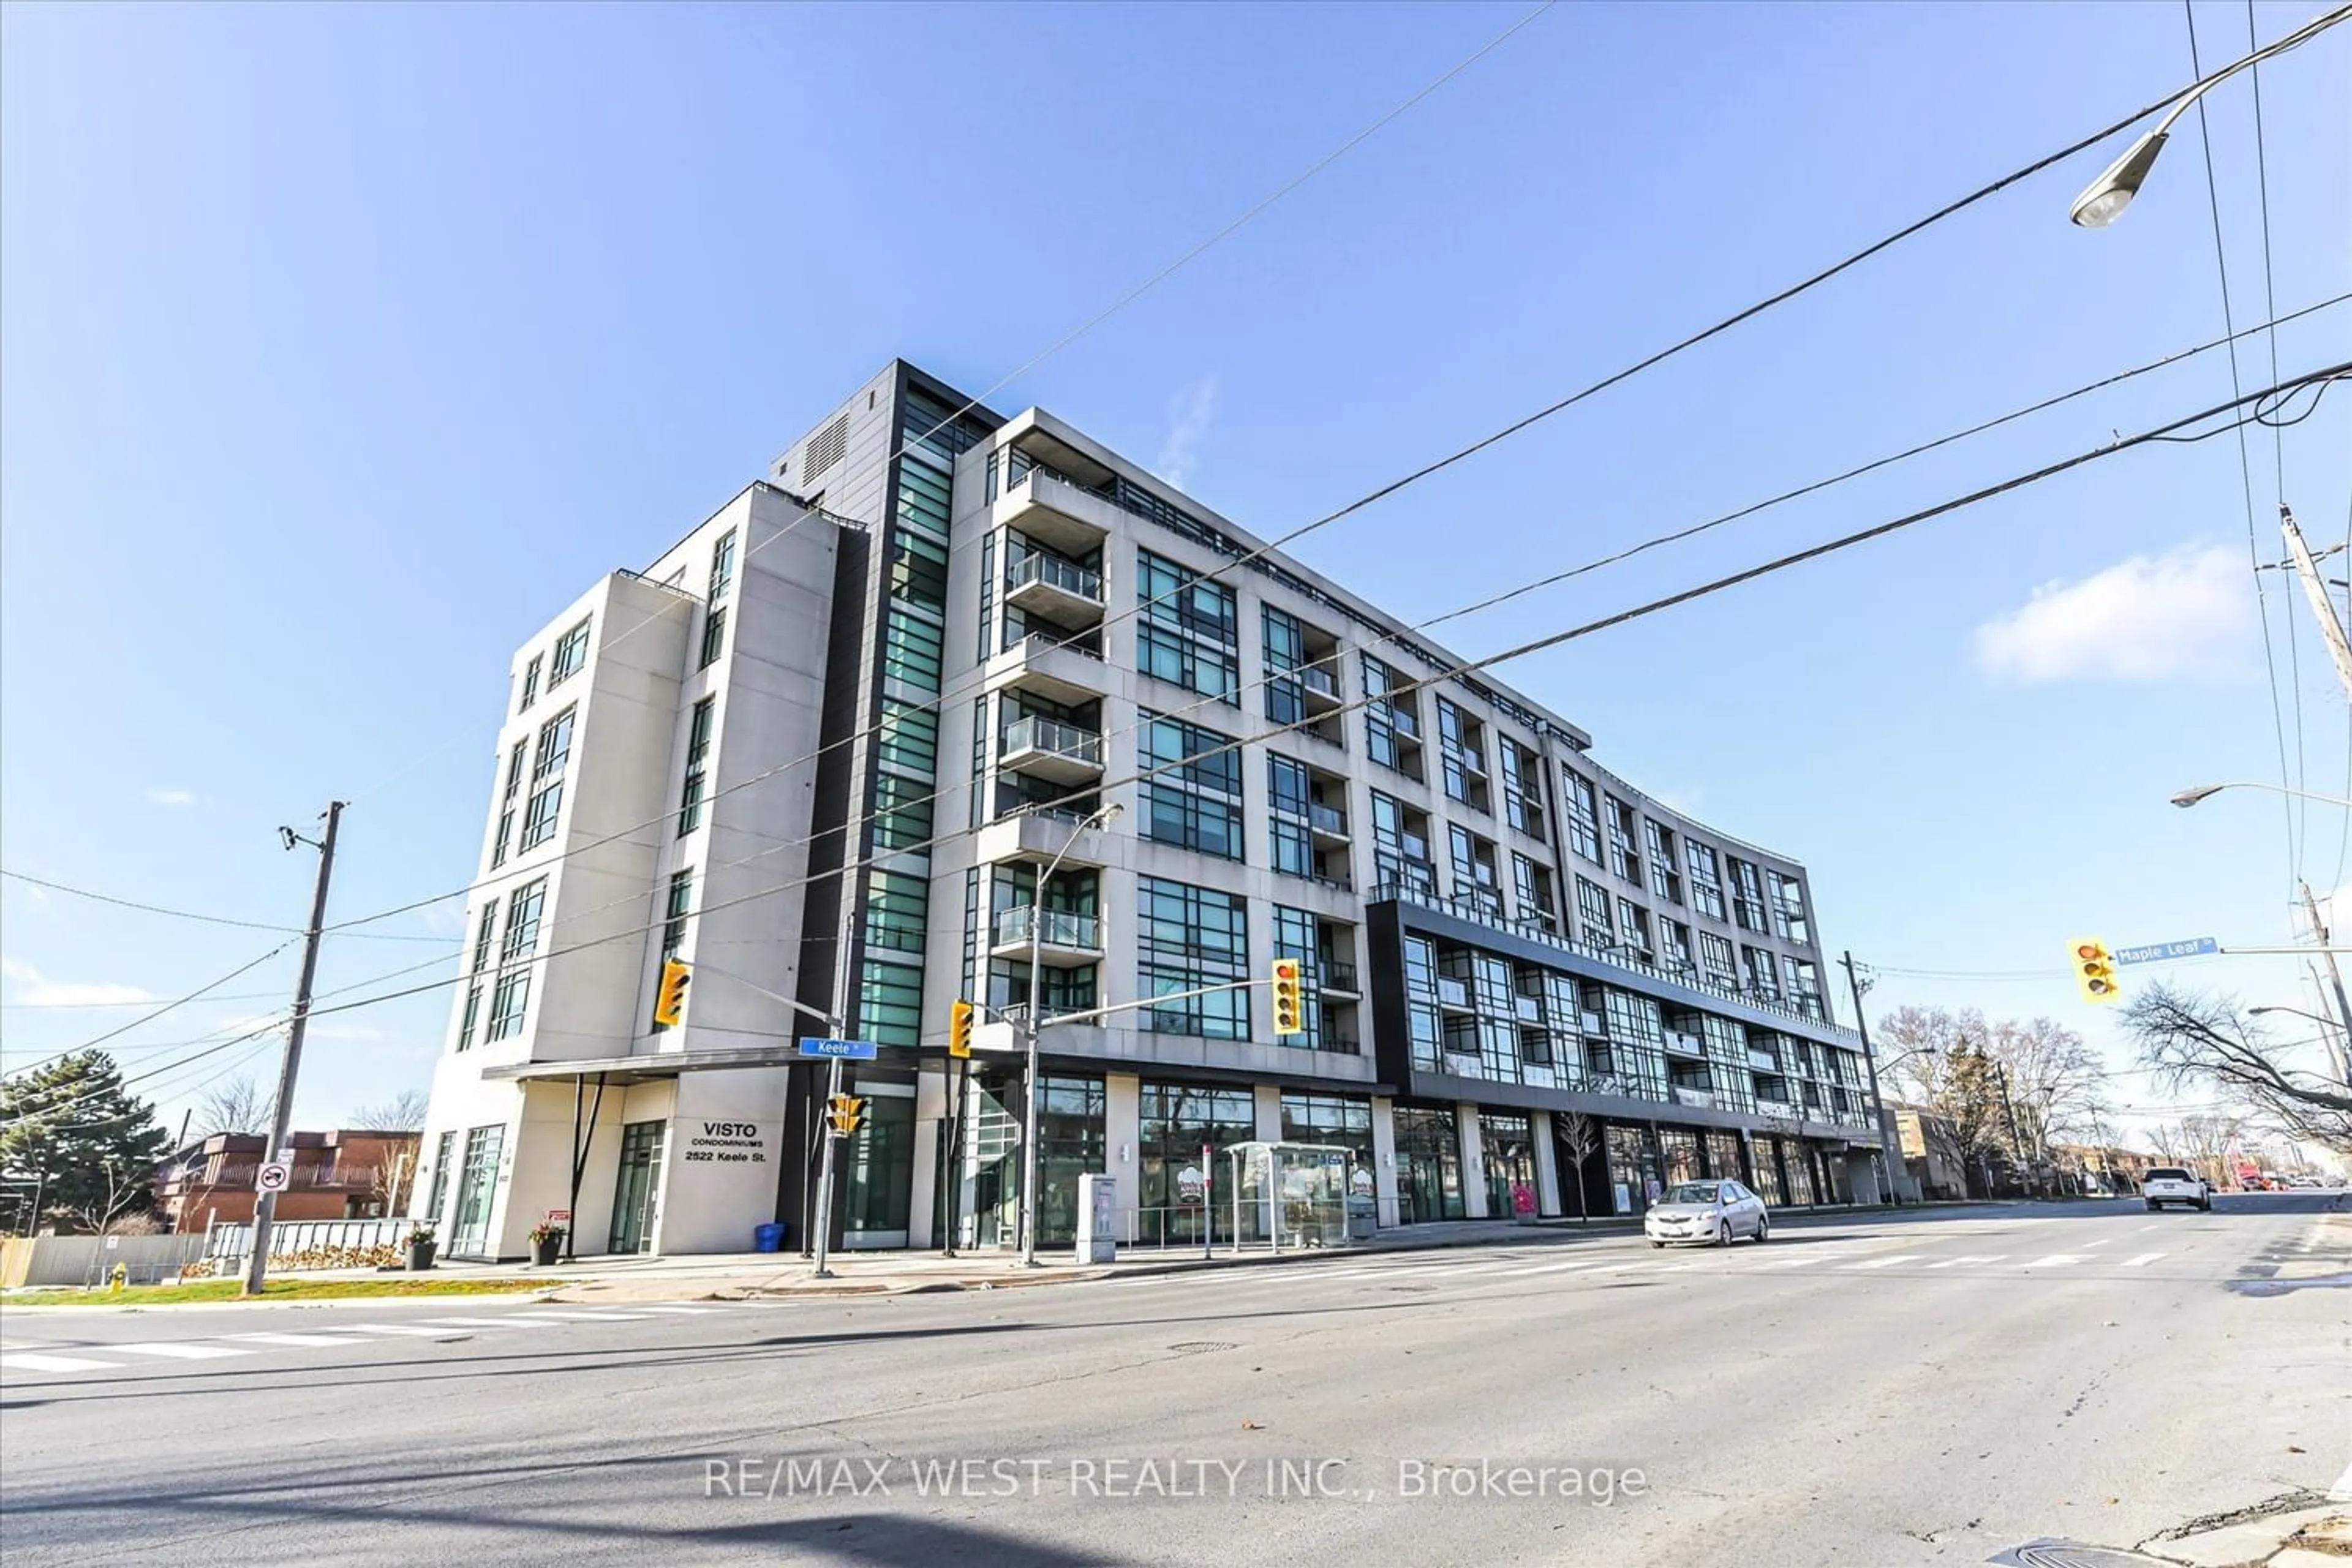 A pic from exterior of the house or condo for 2522 Keele St #618, Toronto Ontario M6L 0A2